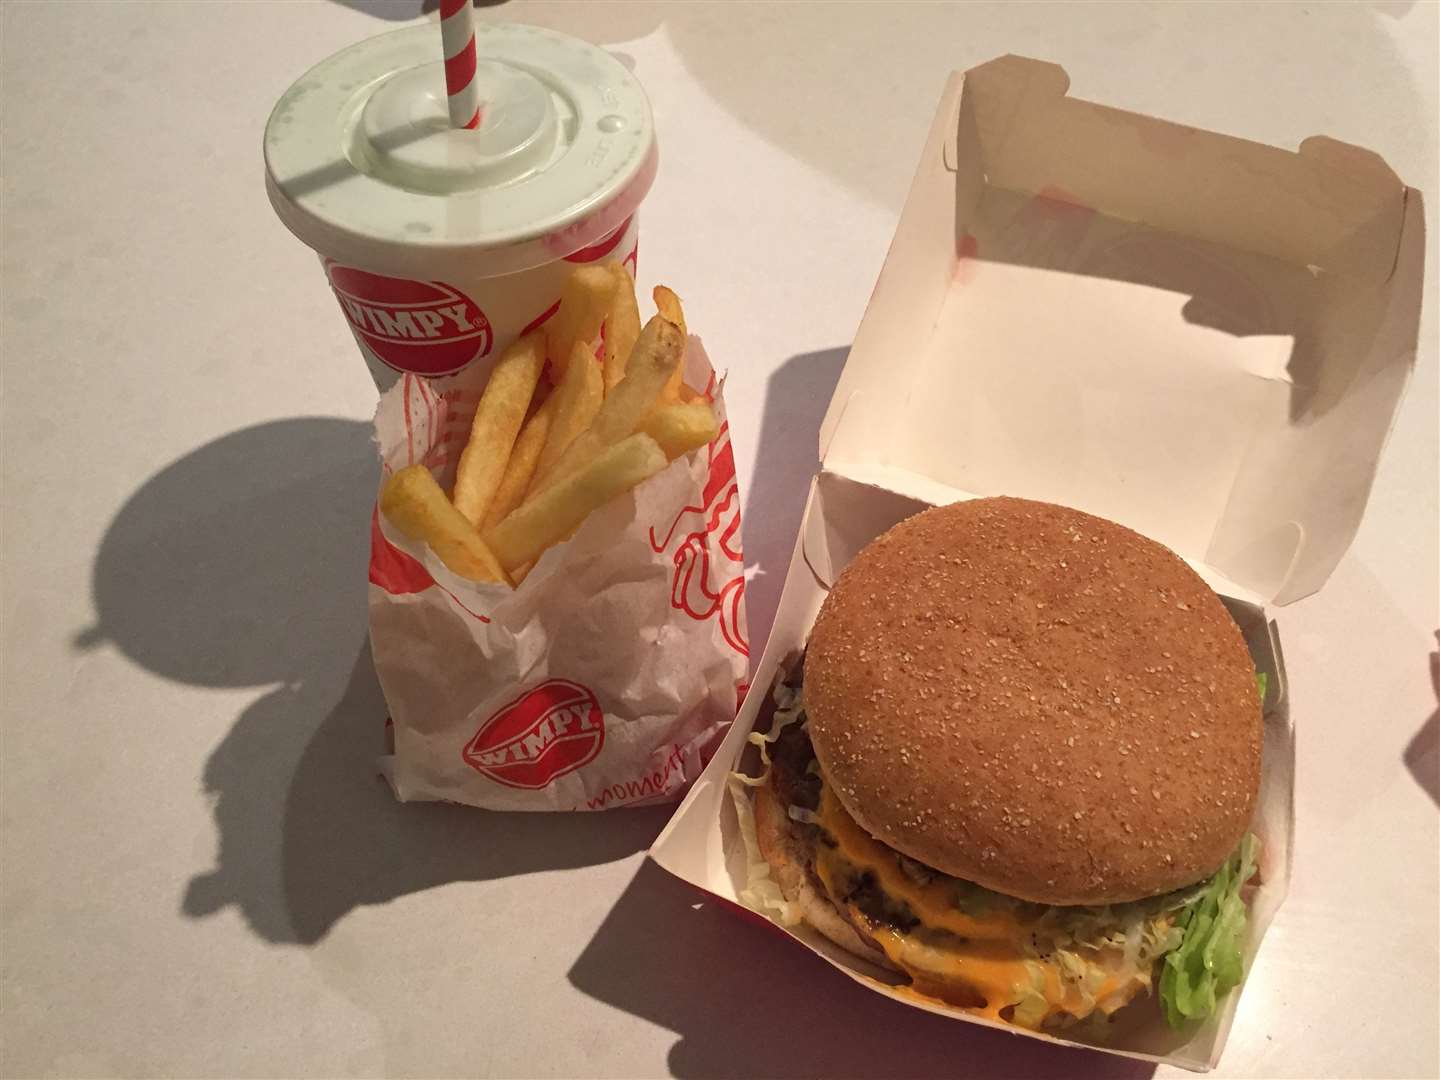 A quarter pounder, chips and a shake from Wimpy comes in at £10